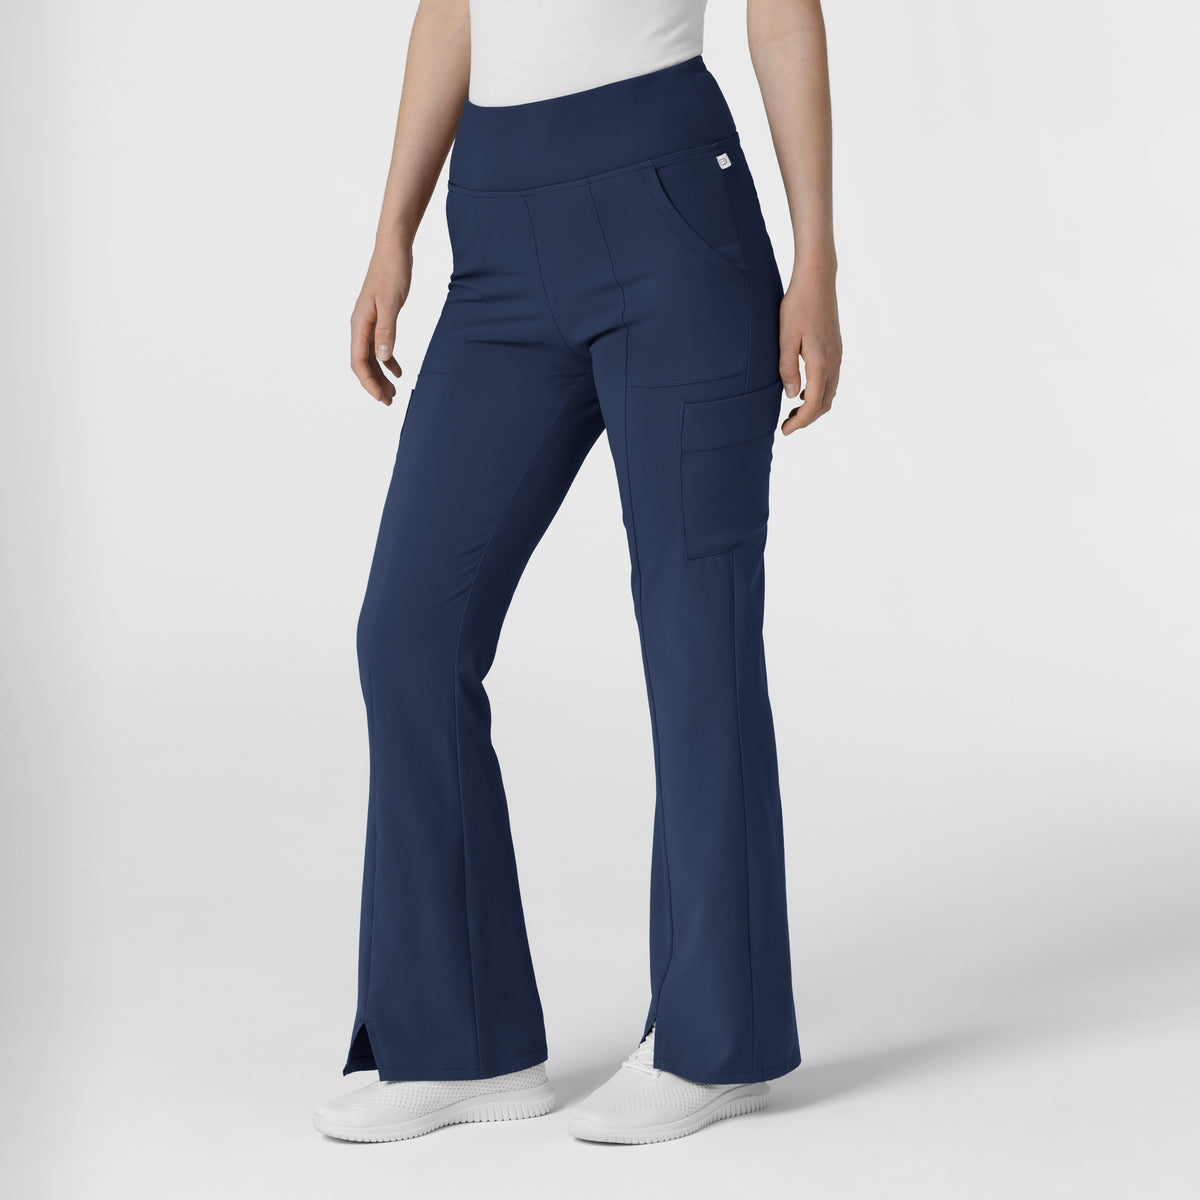 RENEW Women's Front Slit Flare Scrub Pant Navy side view